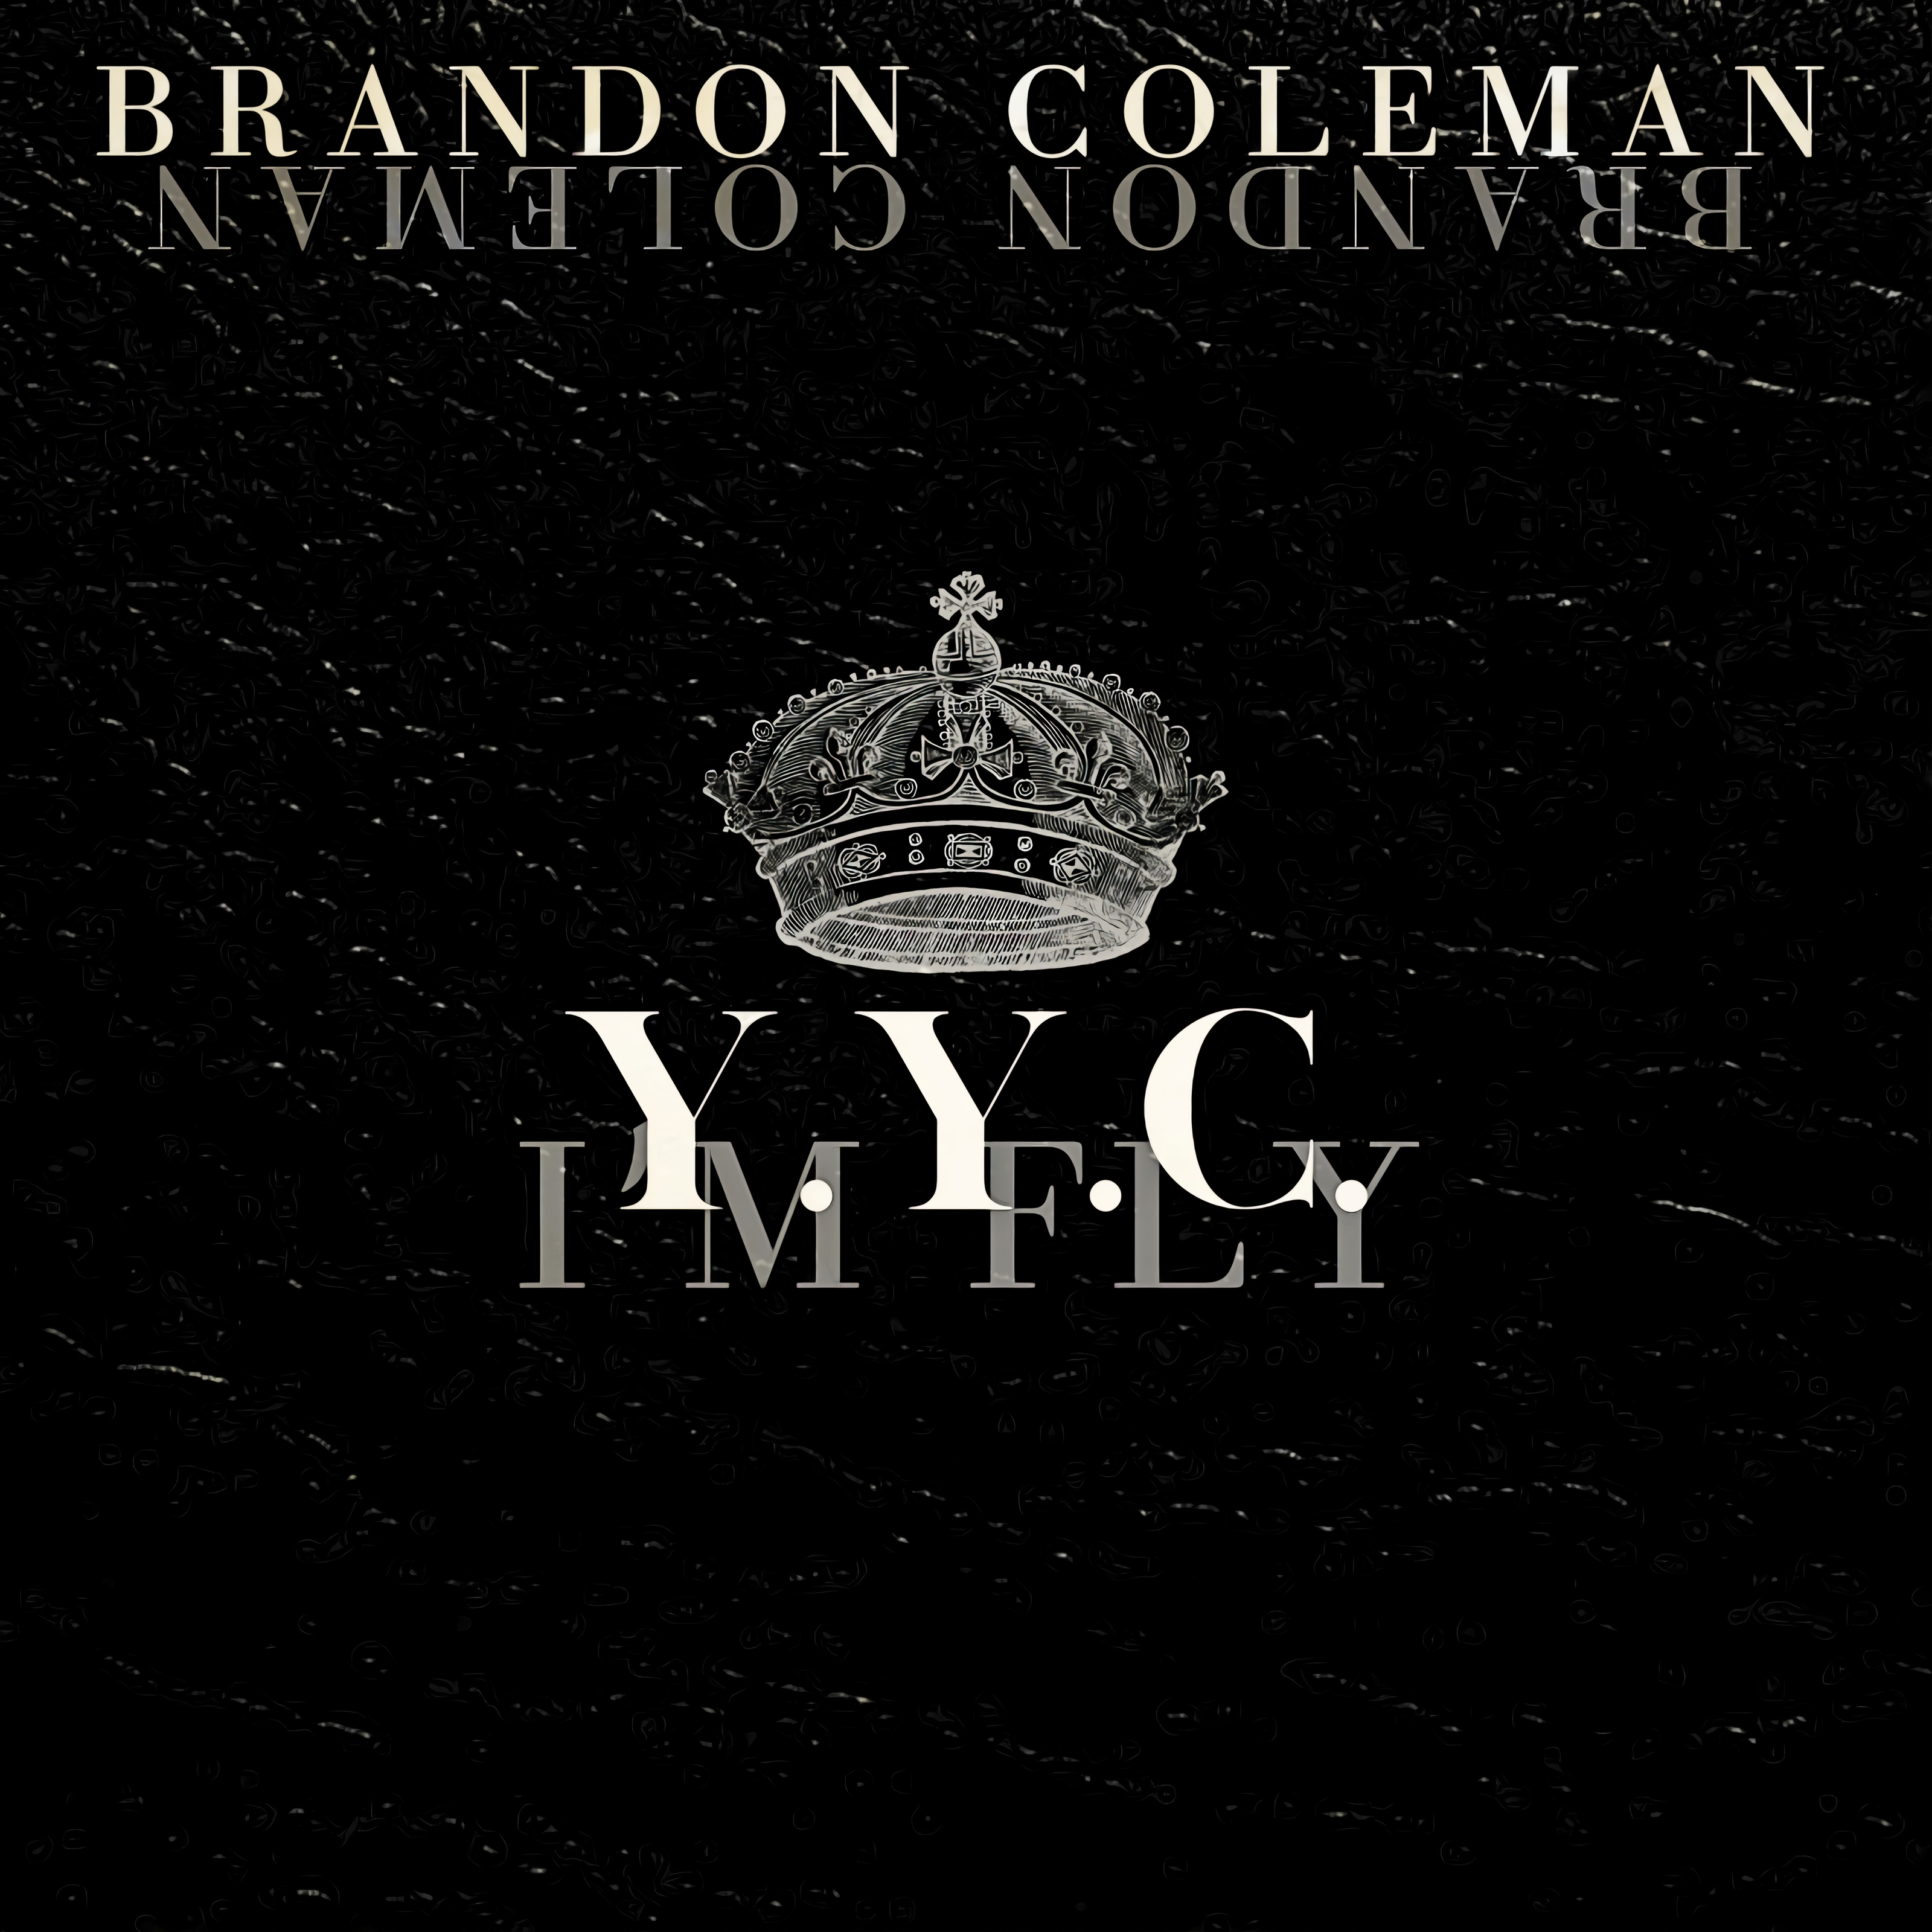 Art for Y.Y.C. I'm Fly by Brandon Coleman